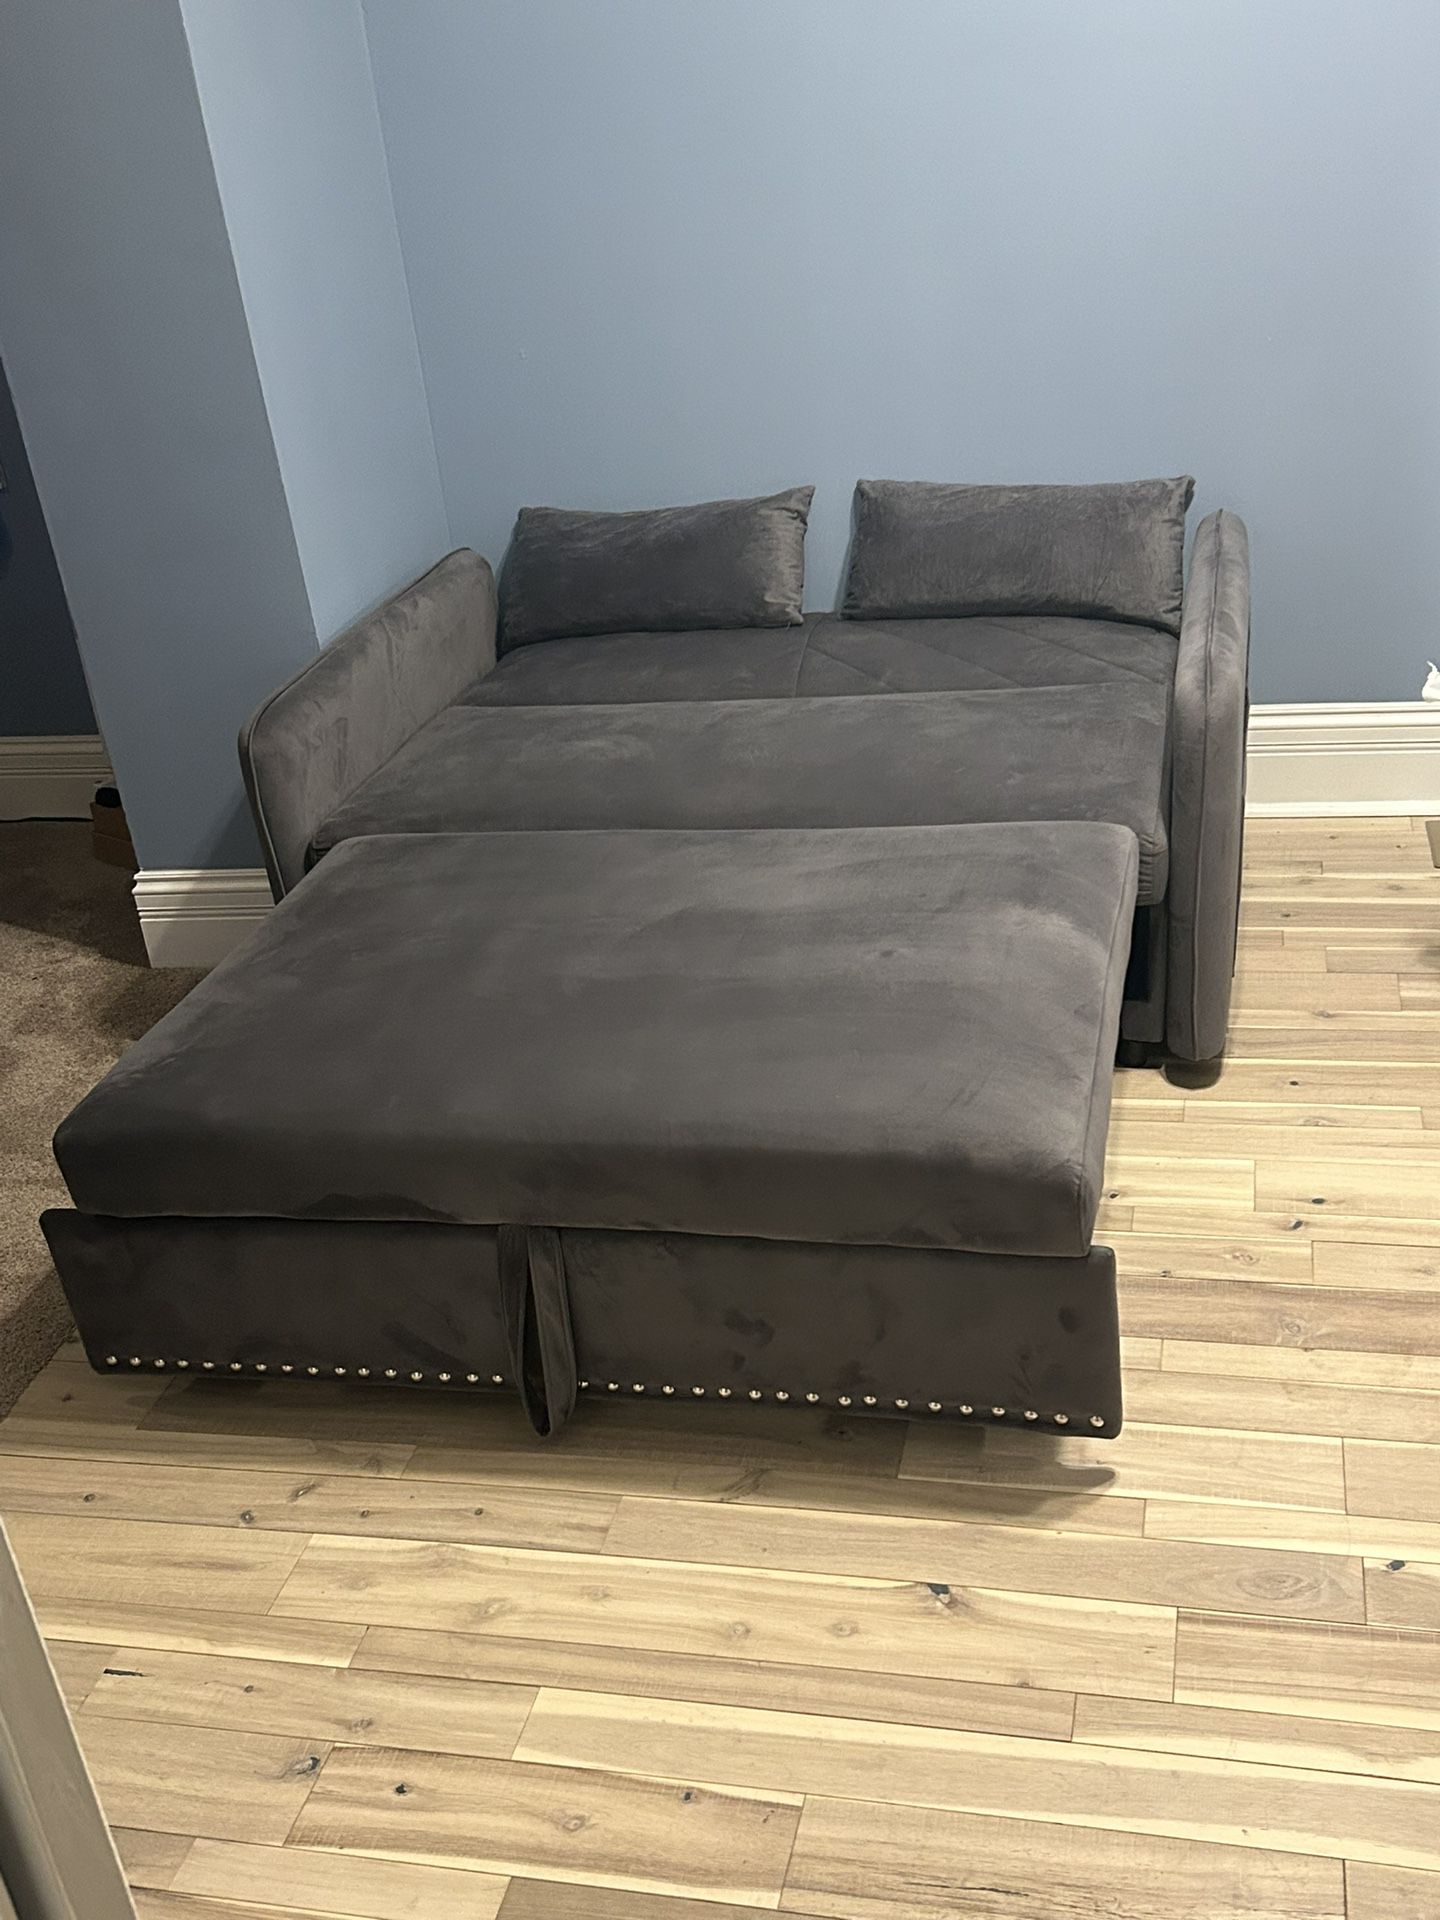 Sleeper Sofa / couch  With Charger Port